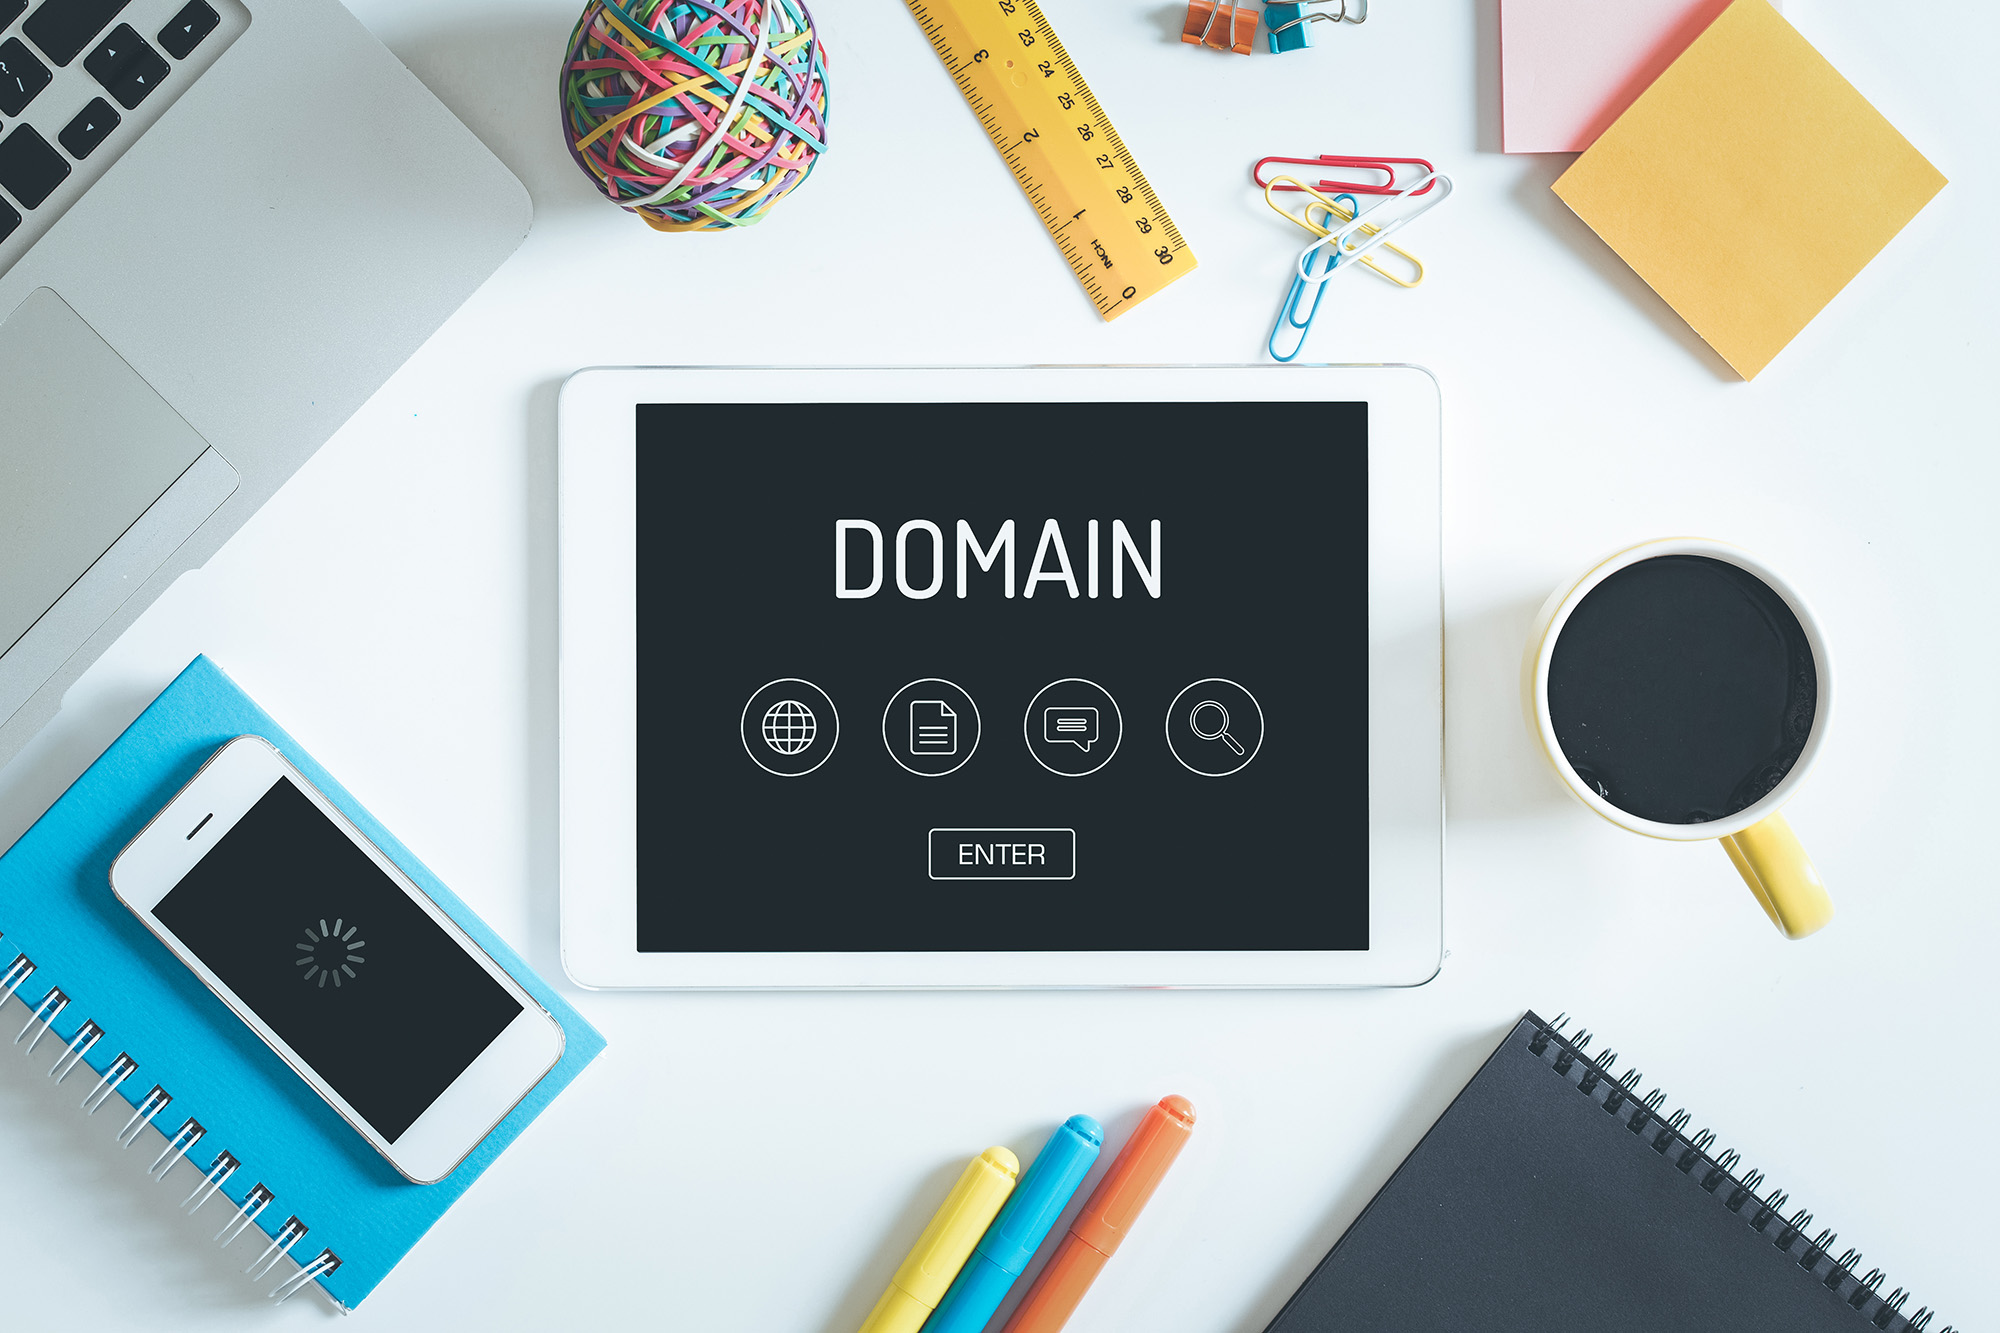 Chapter 5: Domain Name Registrars: Choosing the Best One for Your Needs